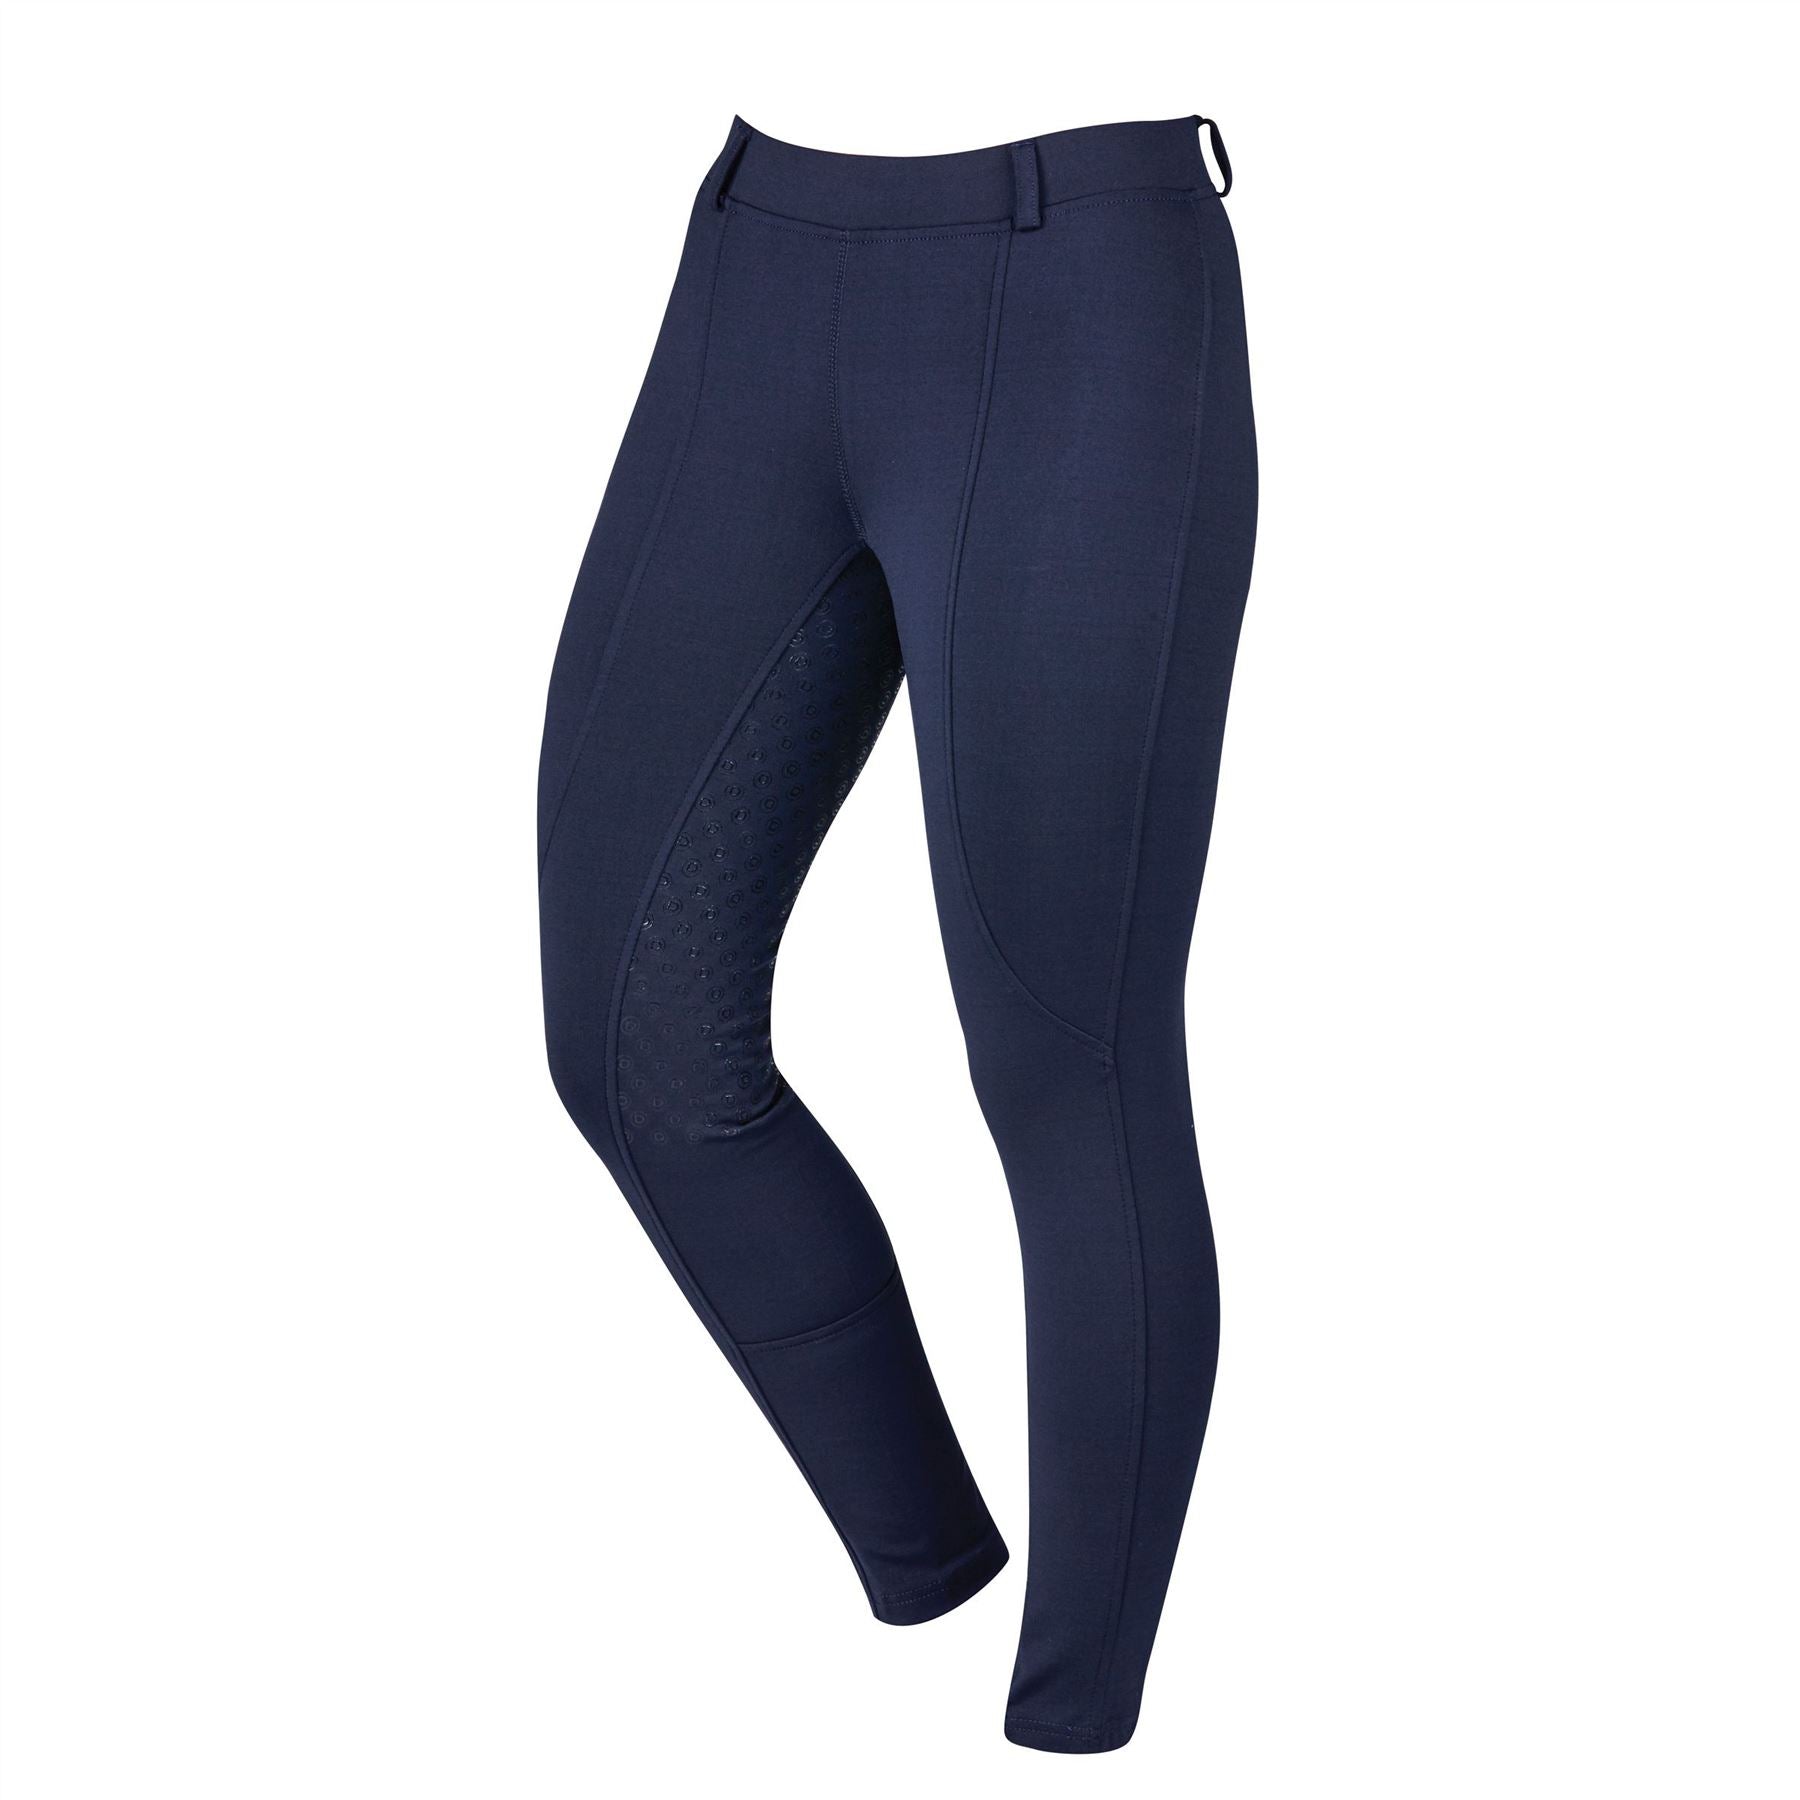 Dublin Performance Cool-It Gel Riding Tights - Just Horse Riders